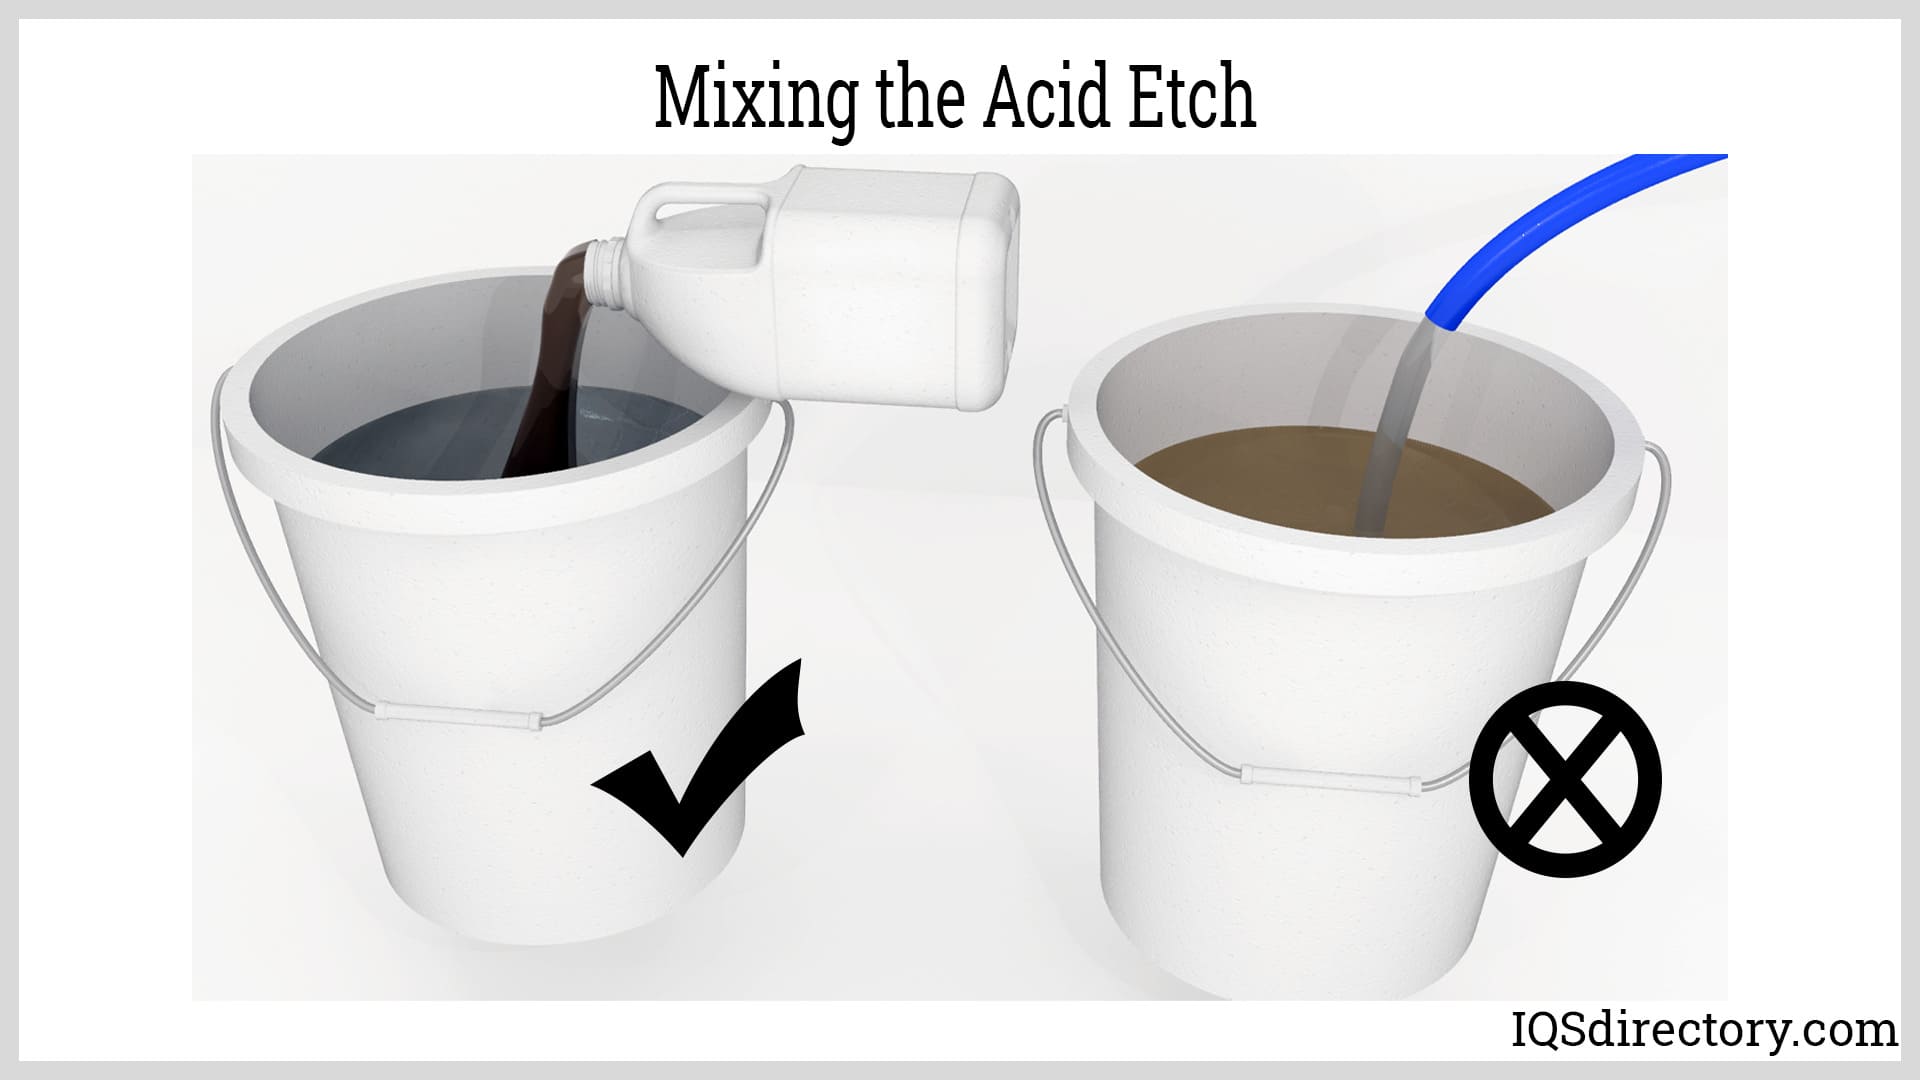 Mixing the Acid Etch